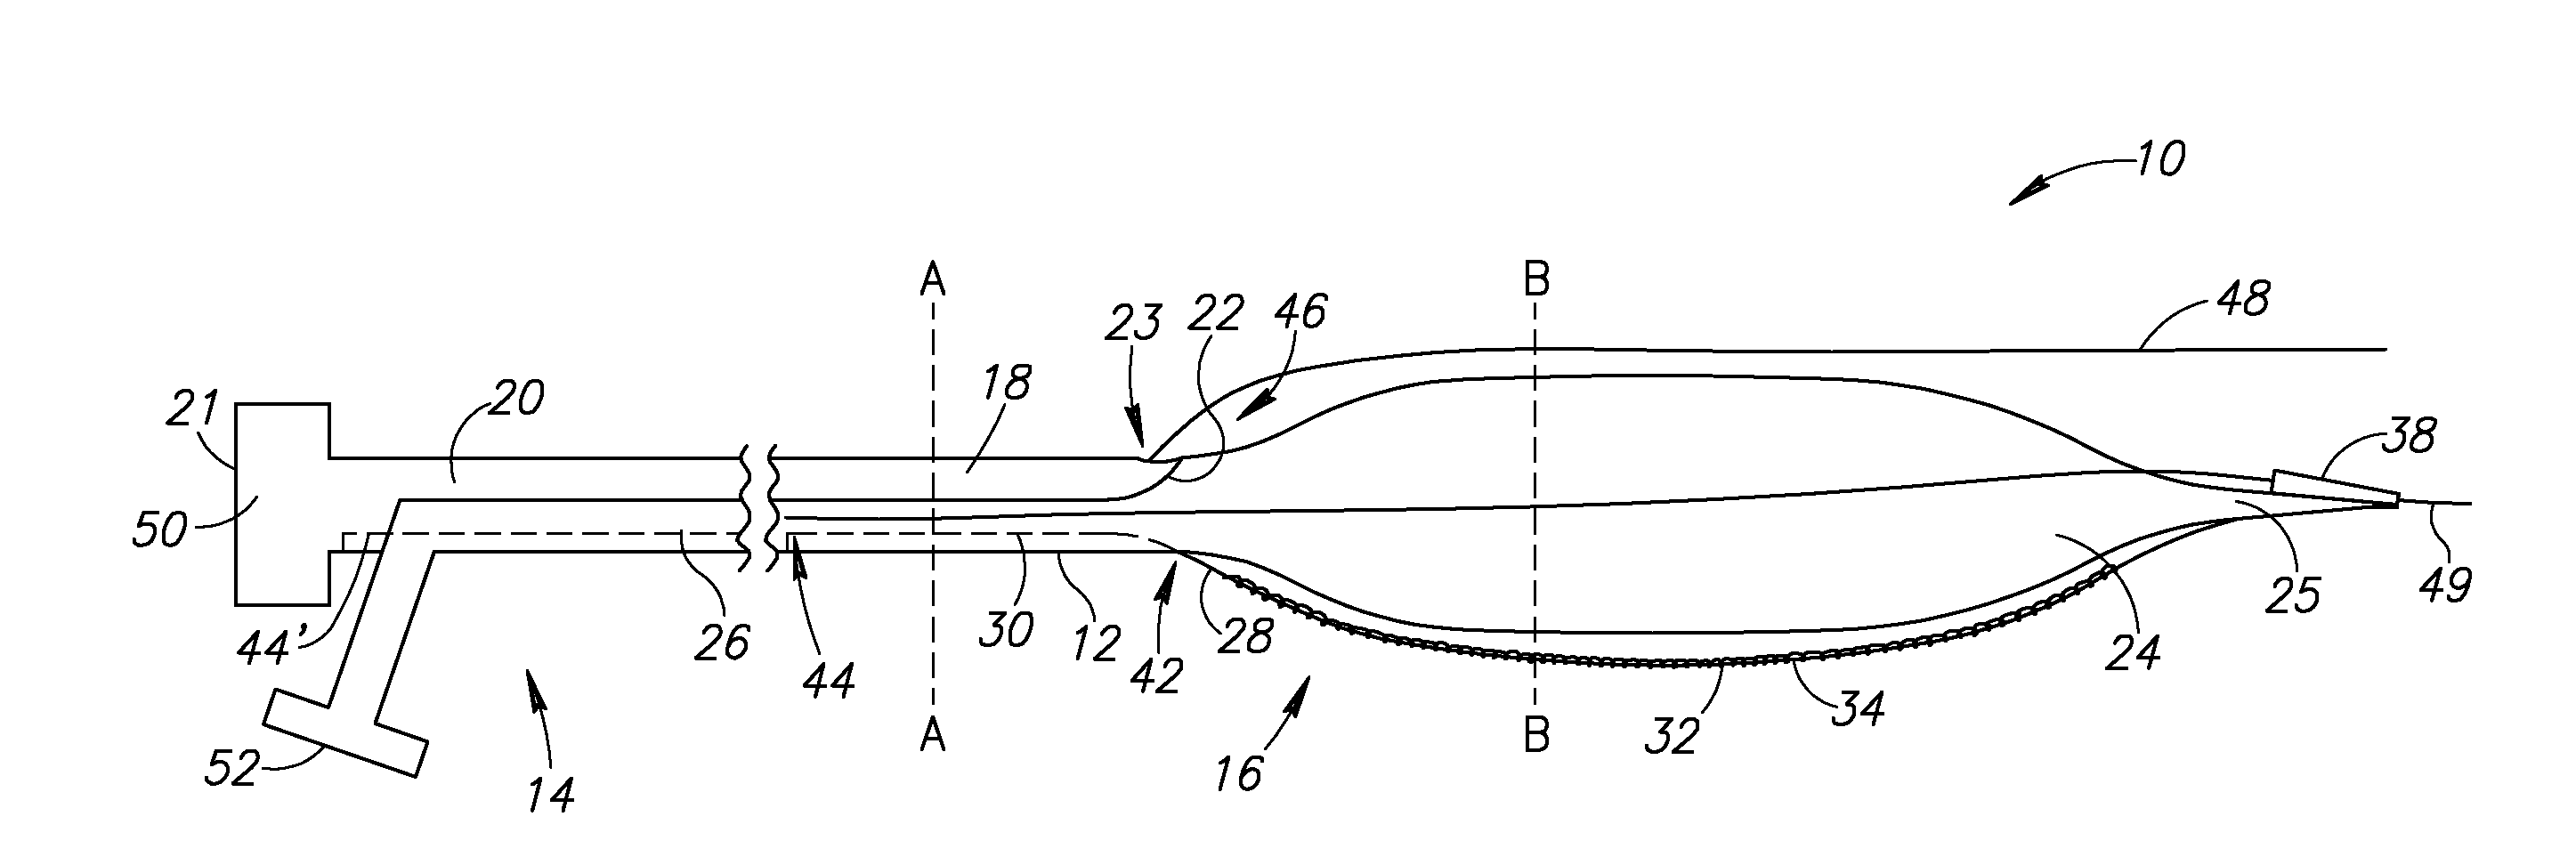 Systems and methods for treating a vessel using focused force